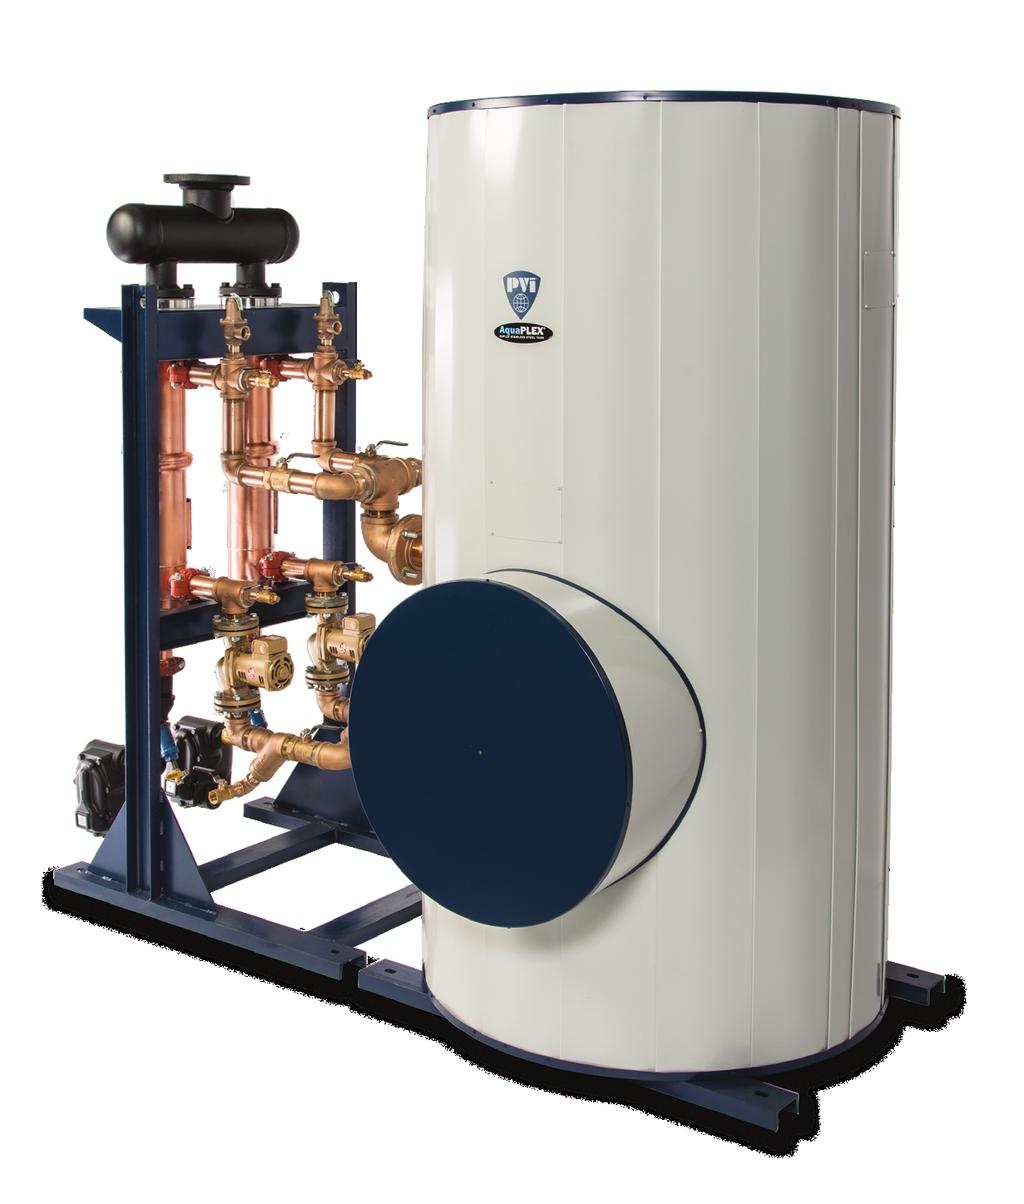 Steam-Fired Domestic Hot Water Generator COBREX Semi-Instantaneous steam water heaters utilize a double-wall, copper-tube, counter-flow heat exchanger to provide moderate to large amounts of domestic